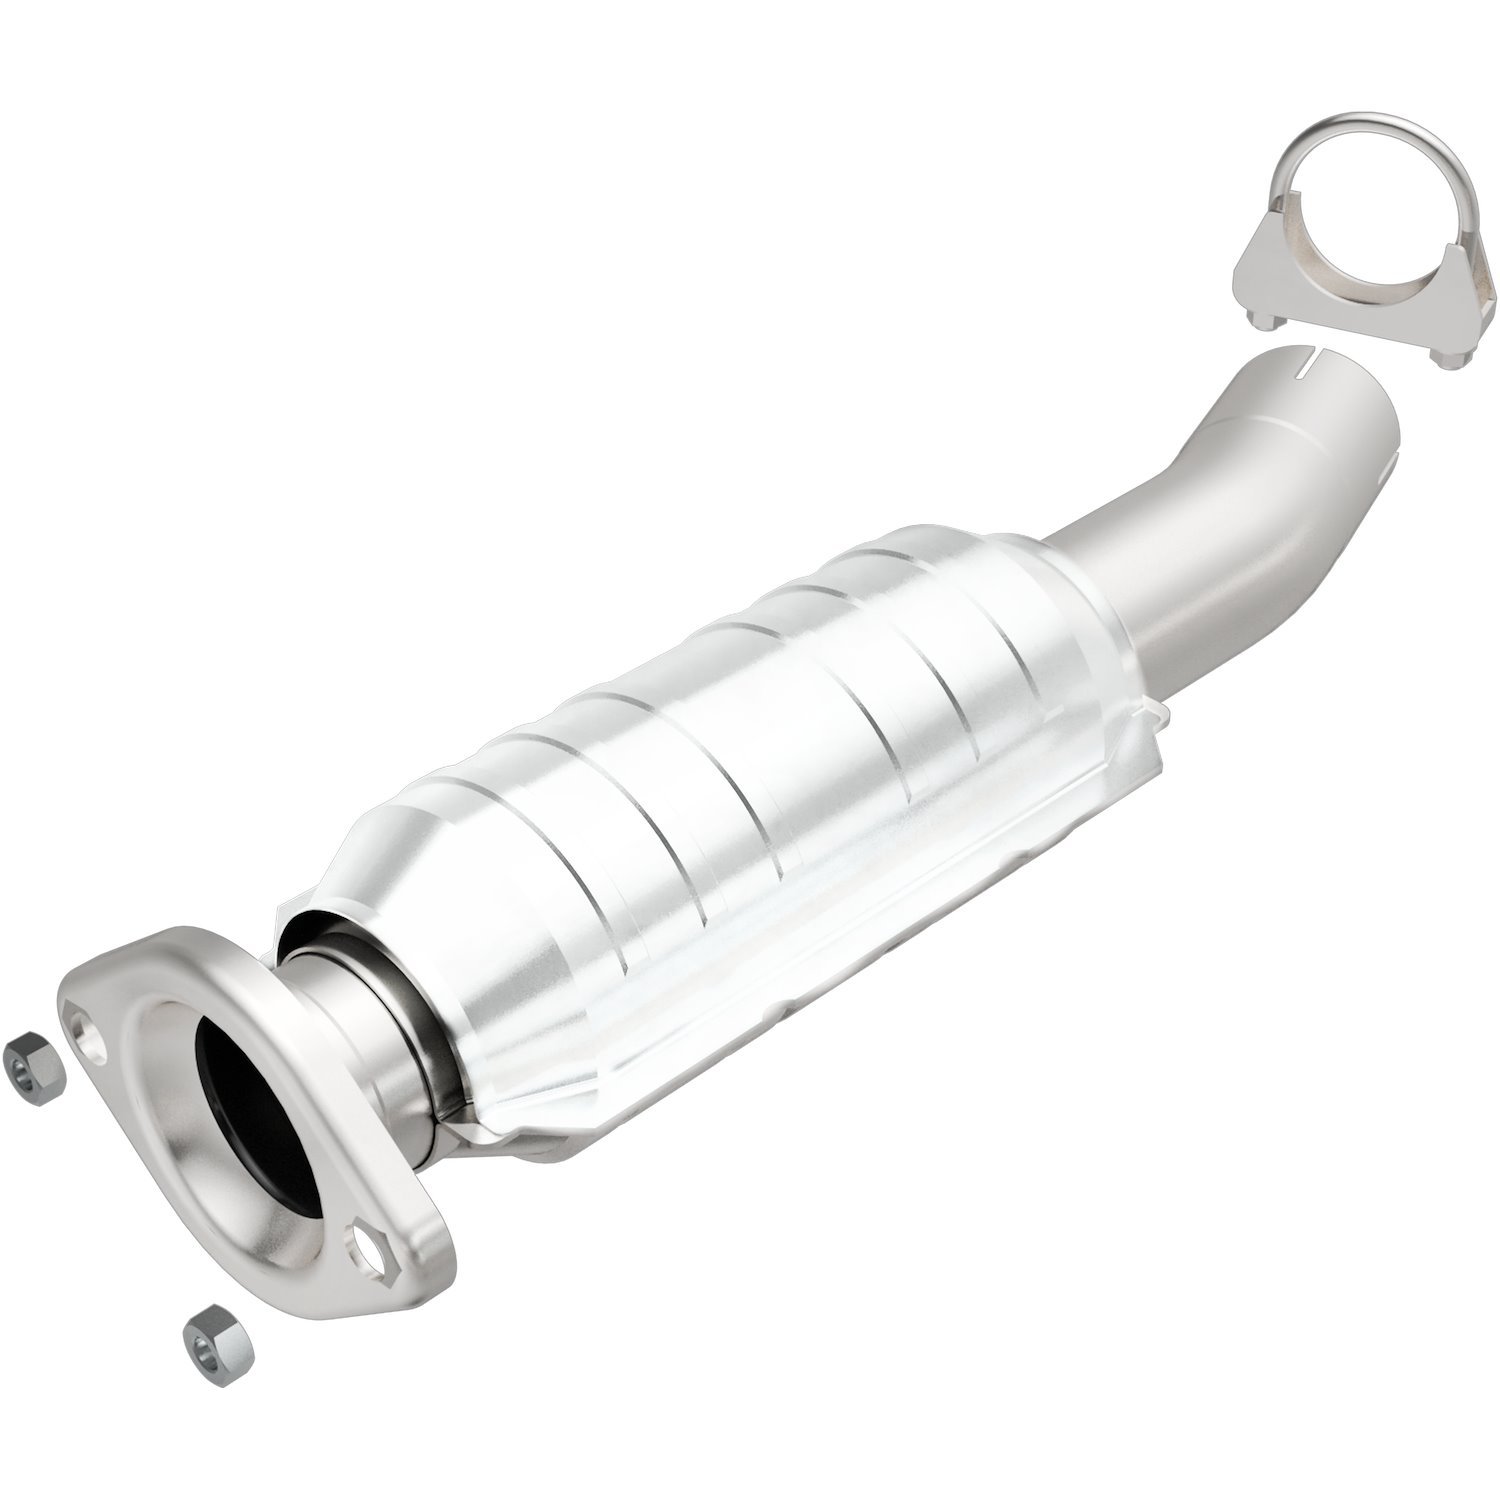 2004-2010 Toyota Sienna OEM Grade Federal / EPA Compliant Direct-Fit Catalytic Converter